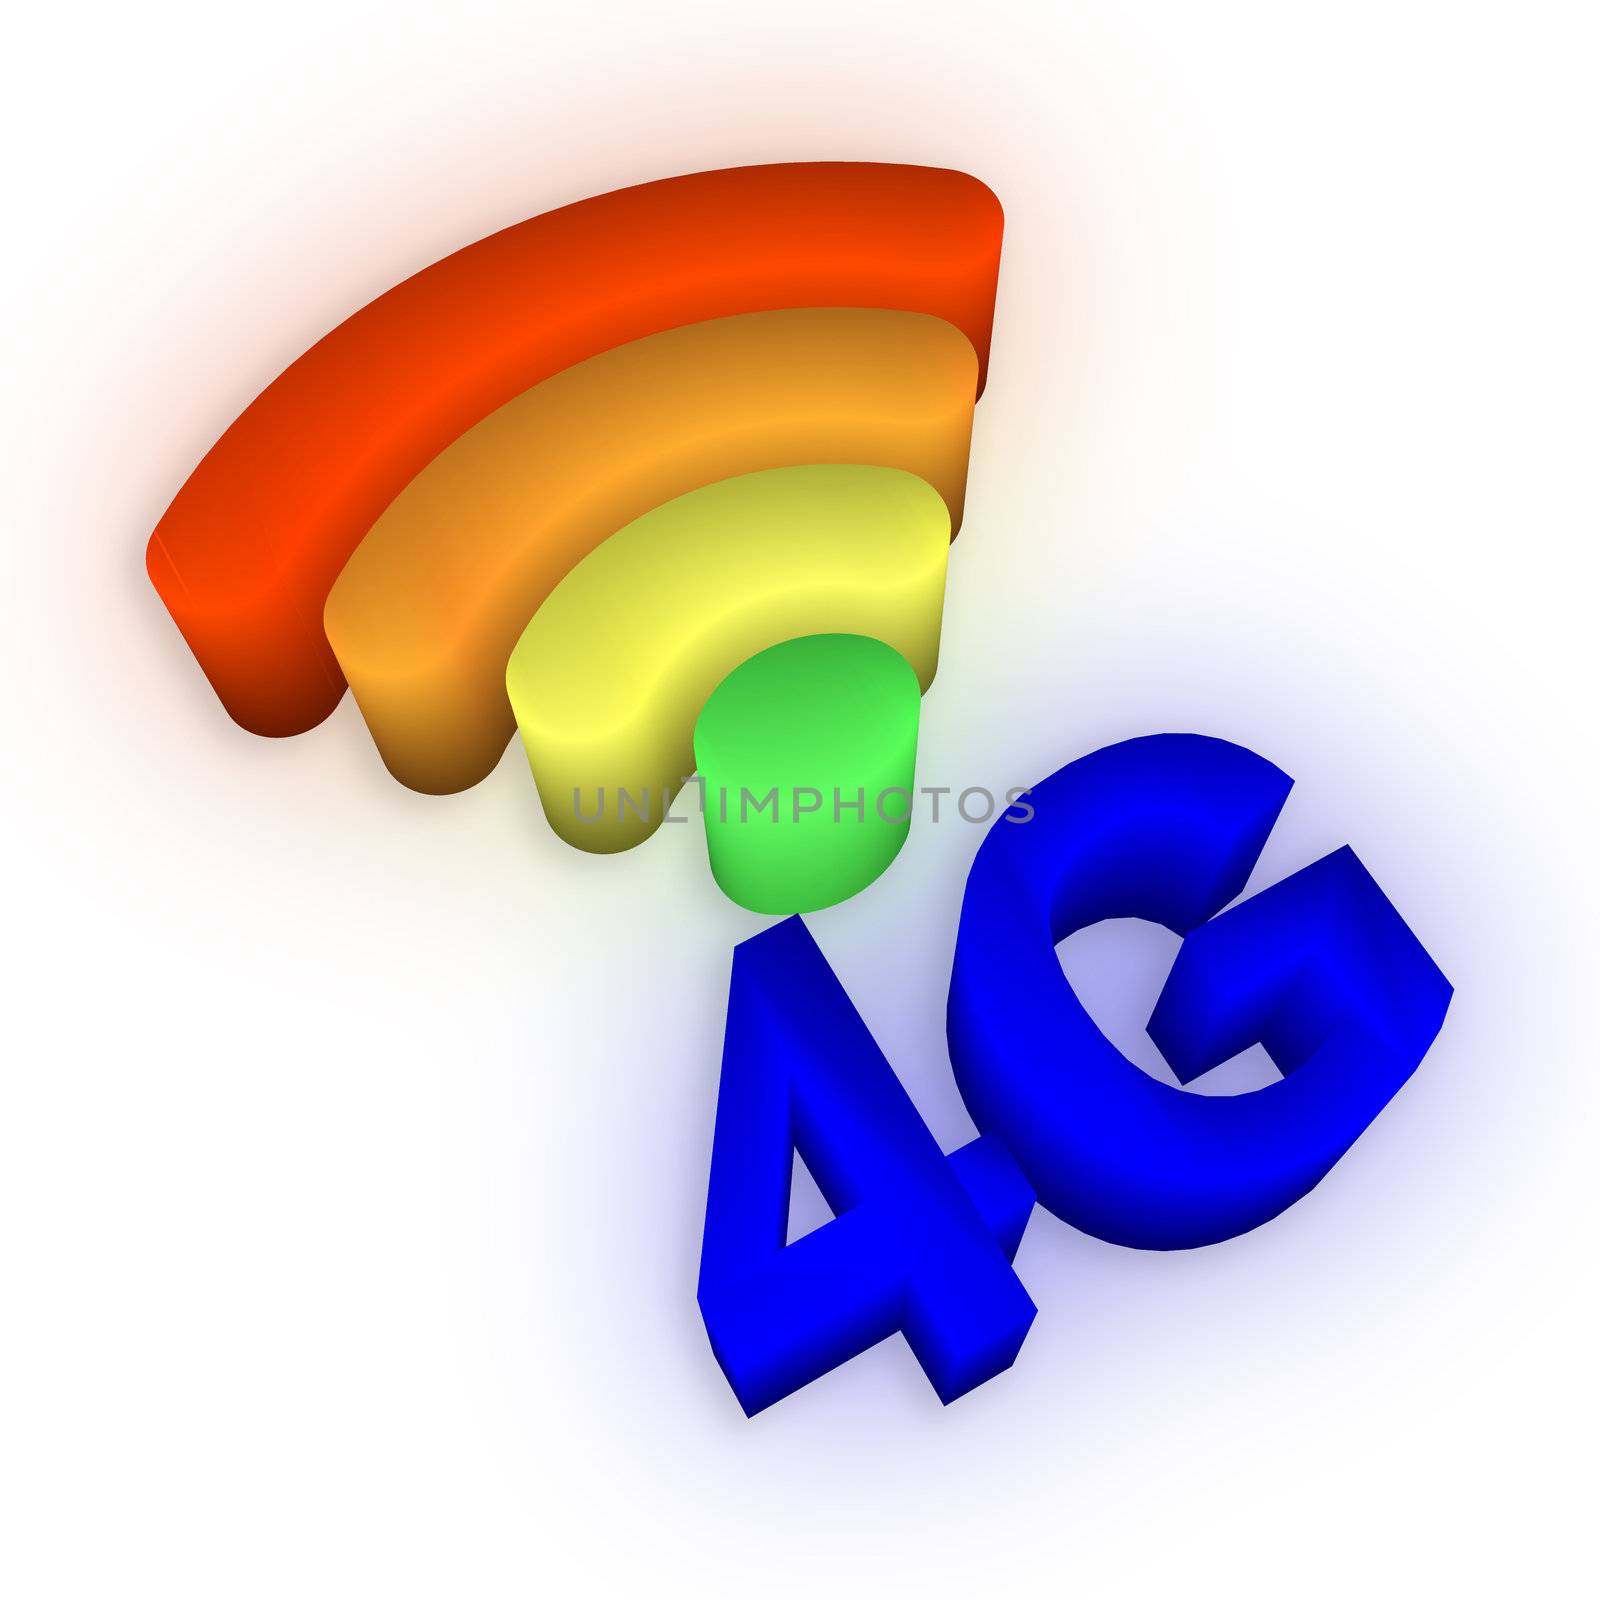 4G and signal symbol by geargodz